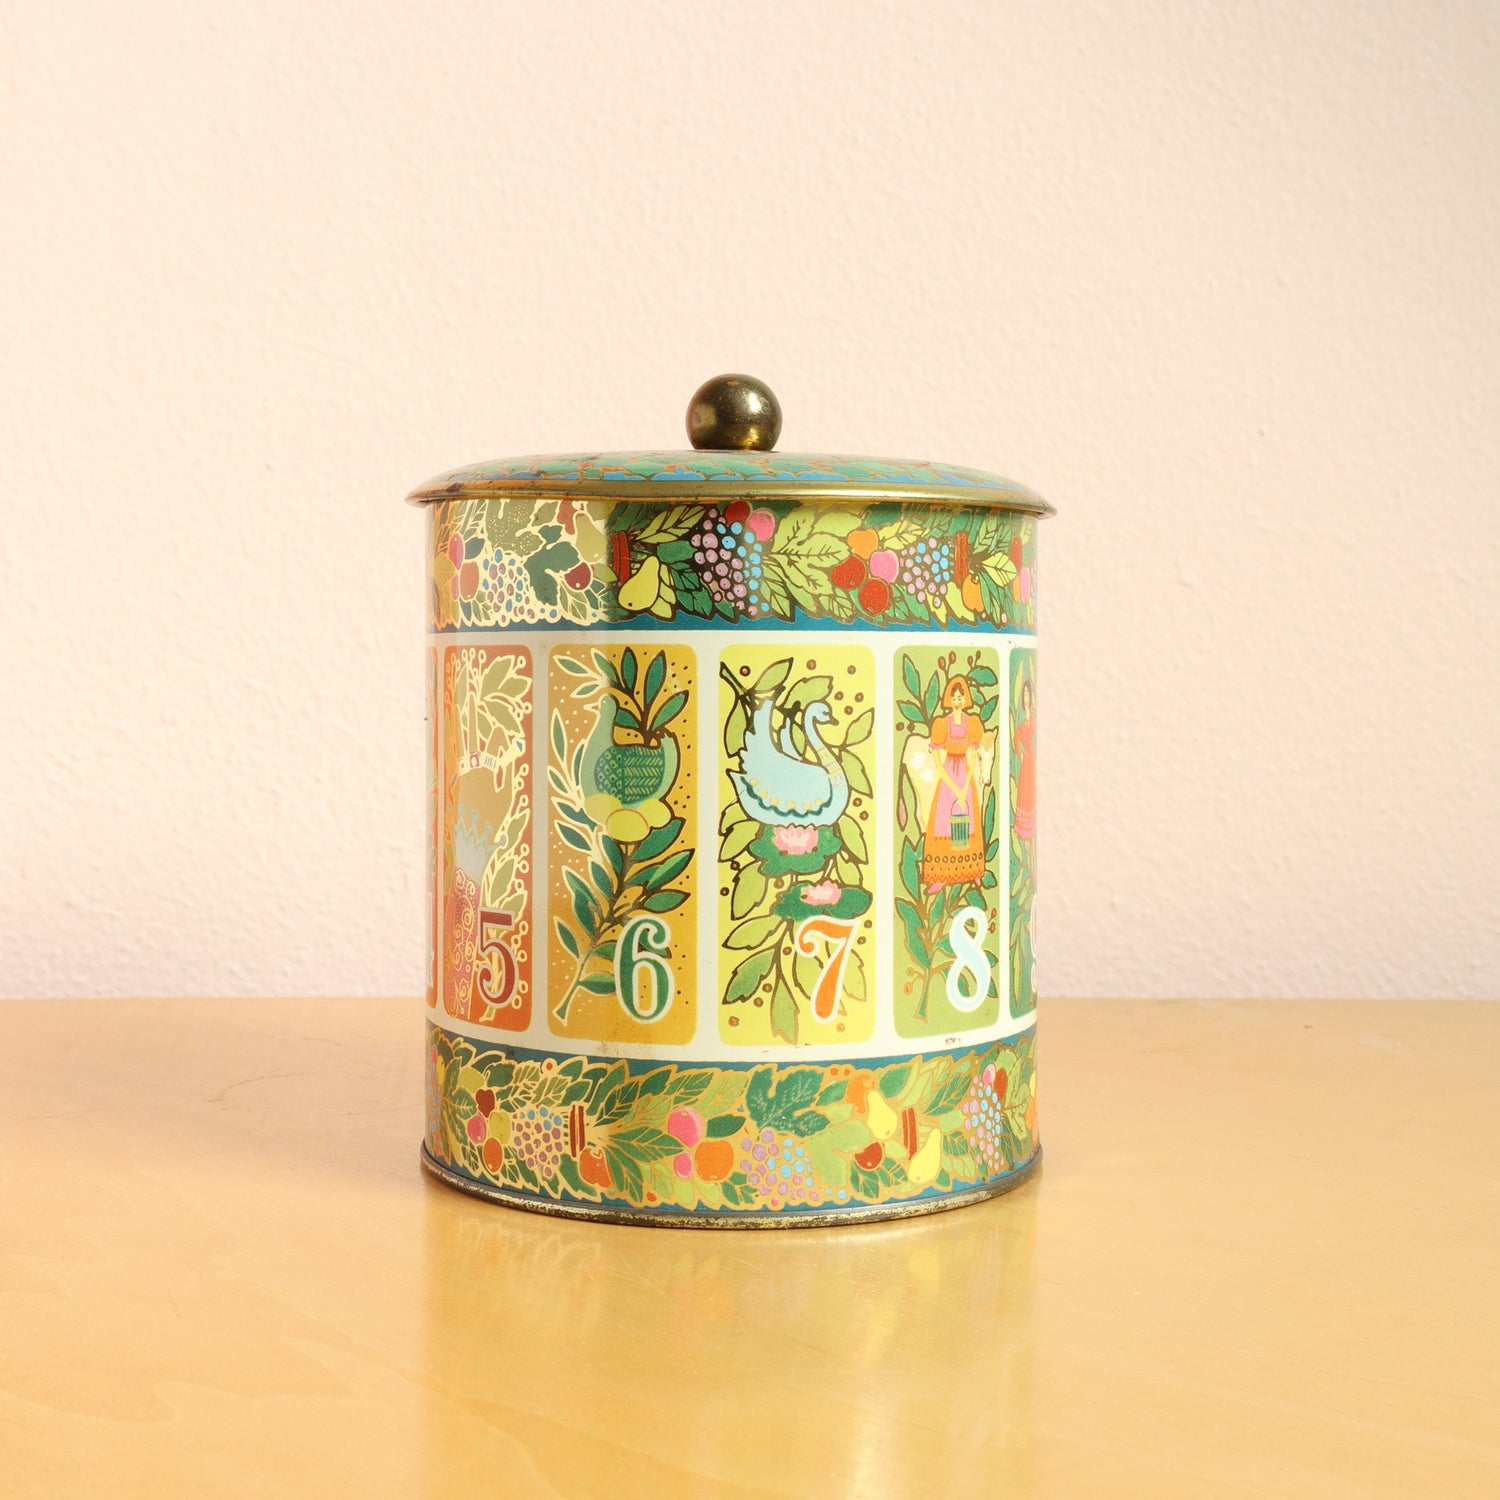 Hallmark 12 Days of Christmas Tin Lithograph Canister with Lid